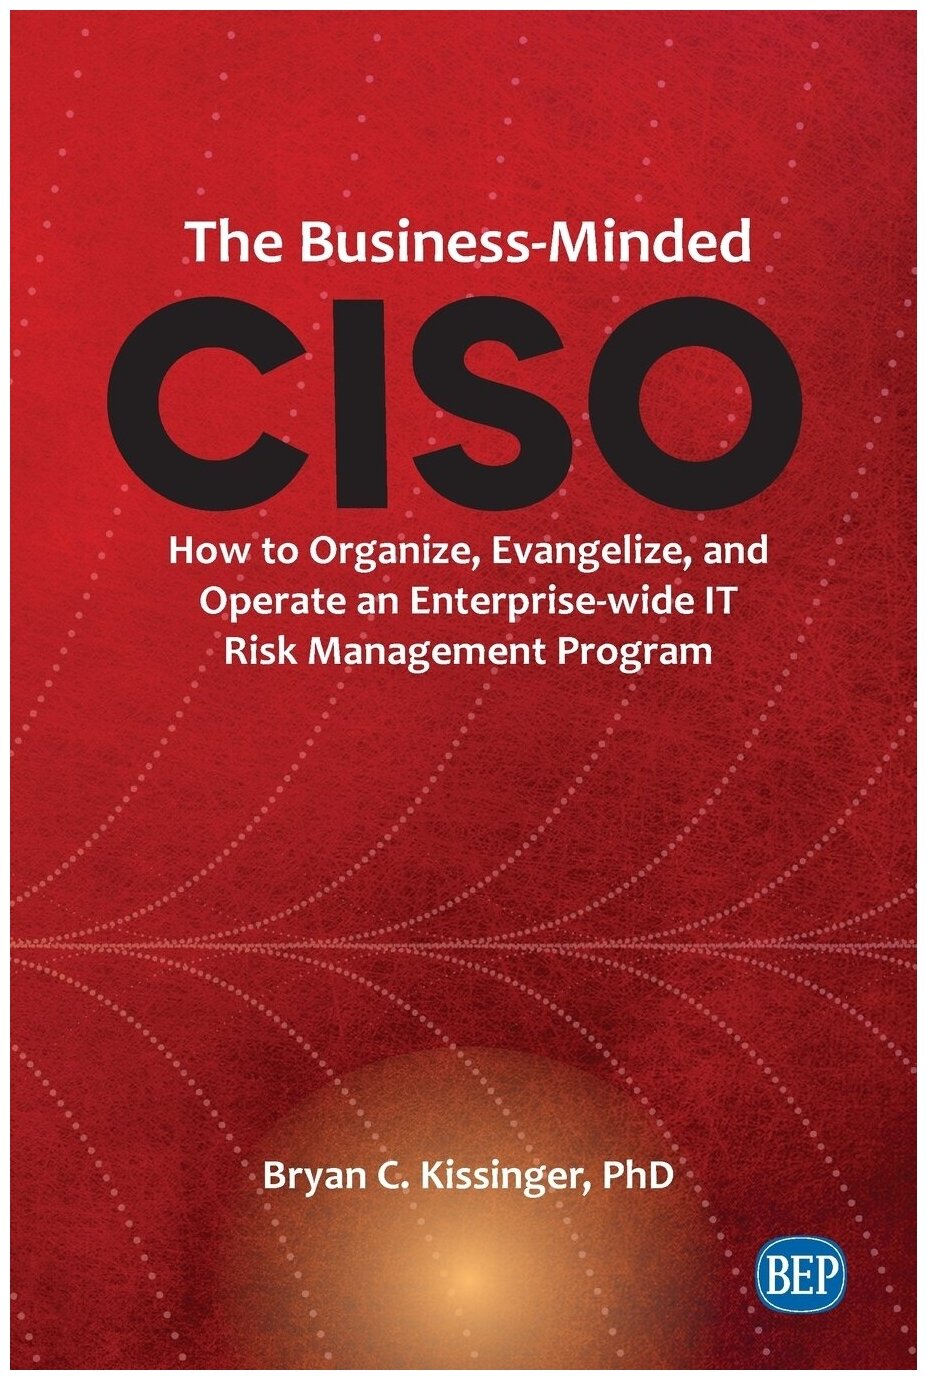 The Business-Minded CISO. How to Organize, Evangelize, and Operate an Enterprise-wide IT Risk Management Program